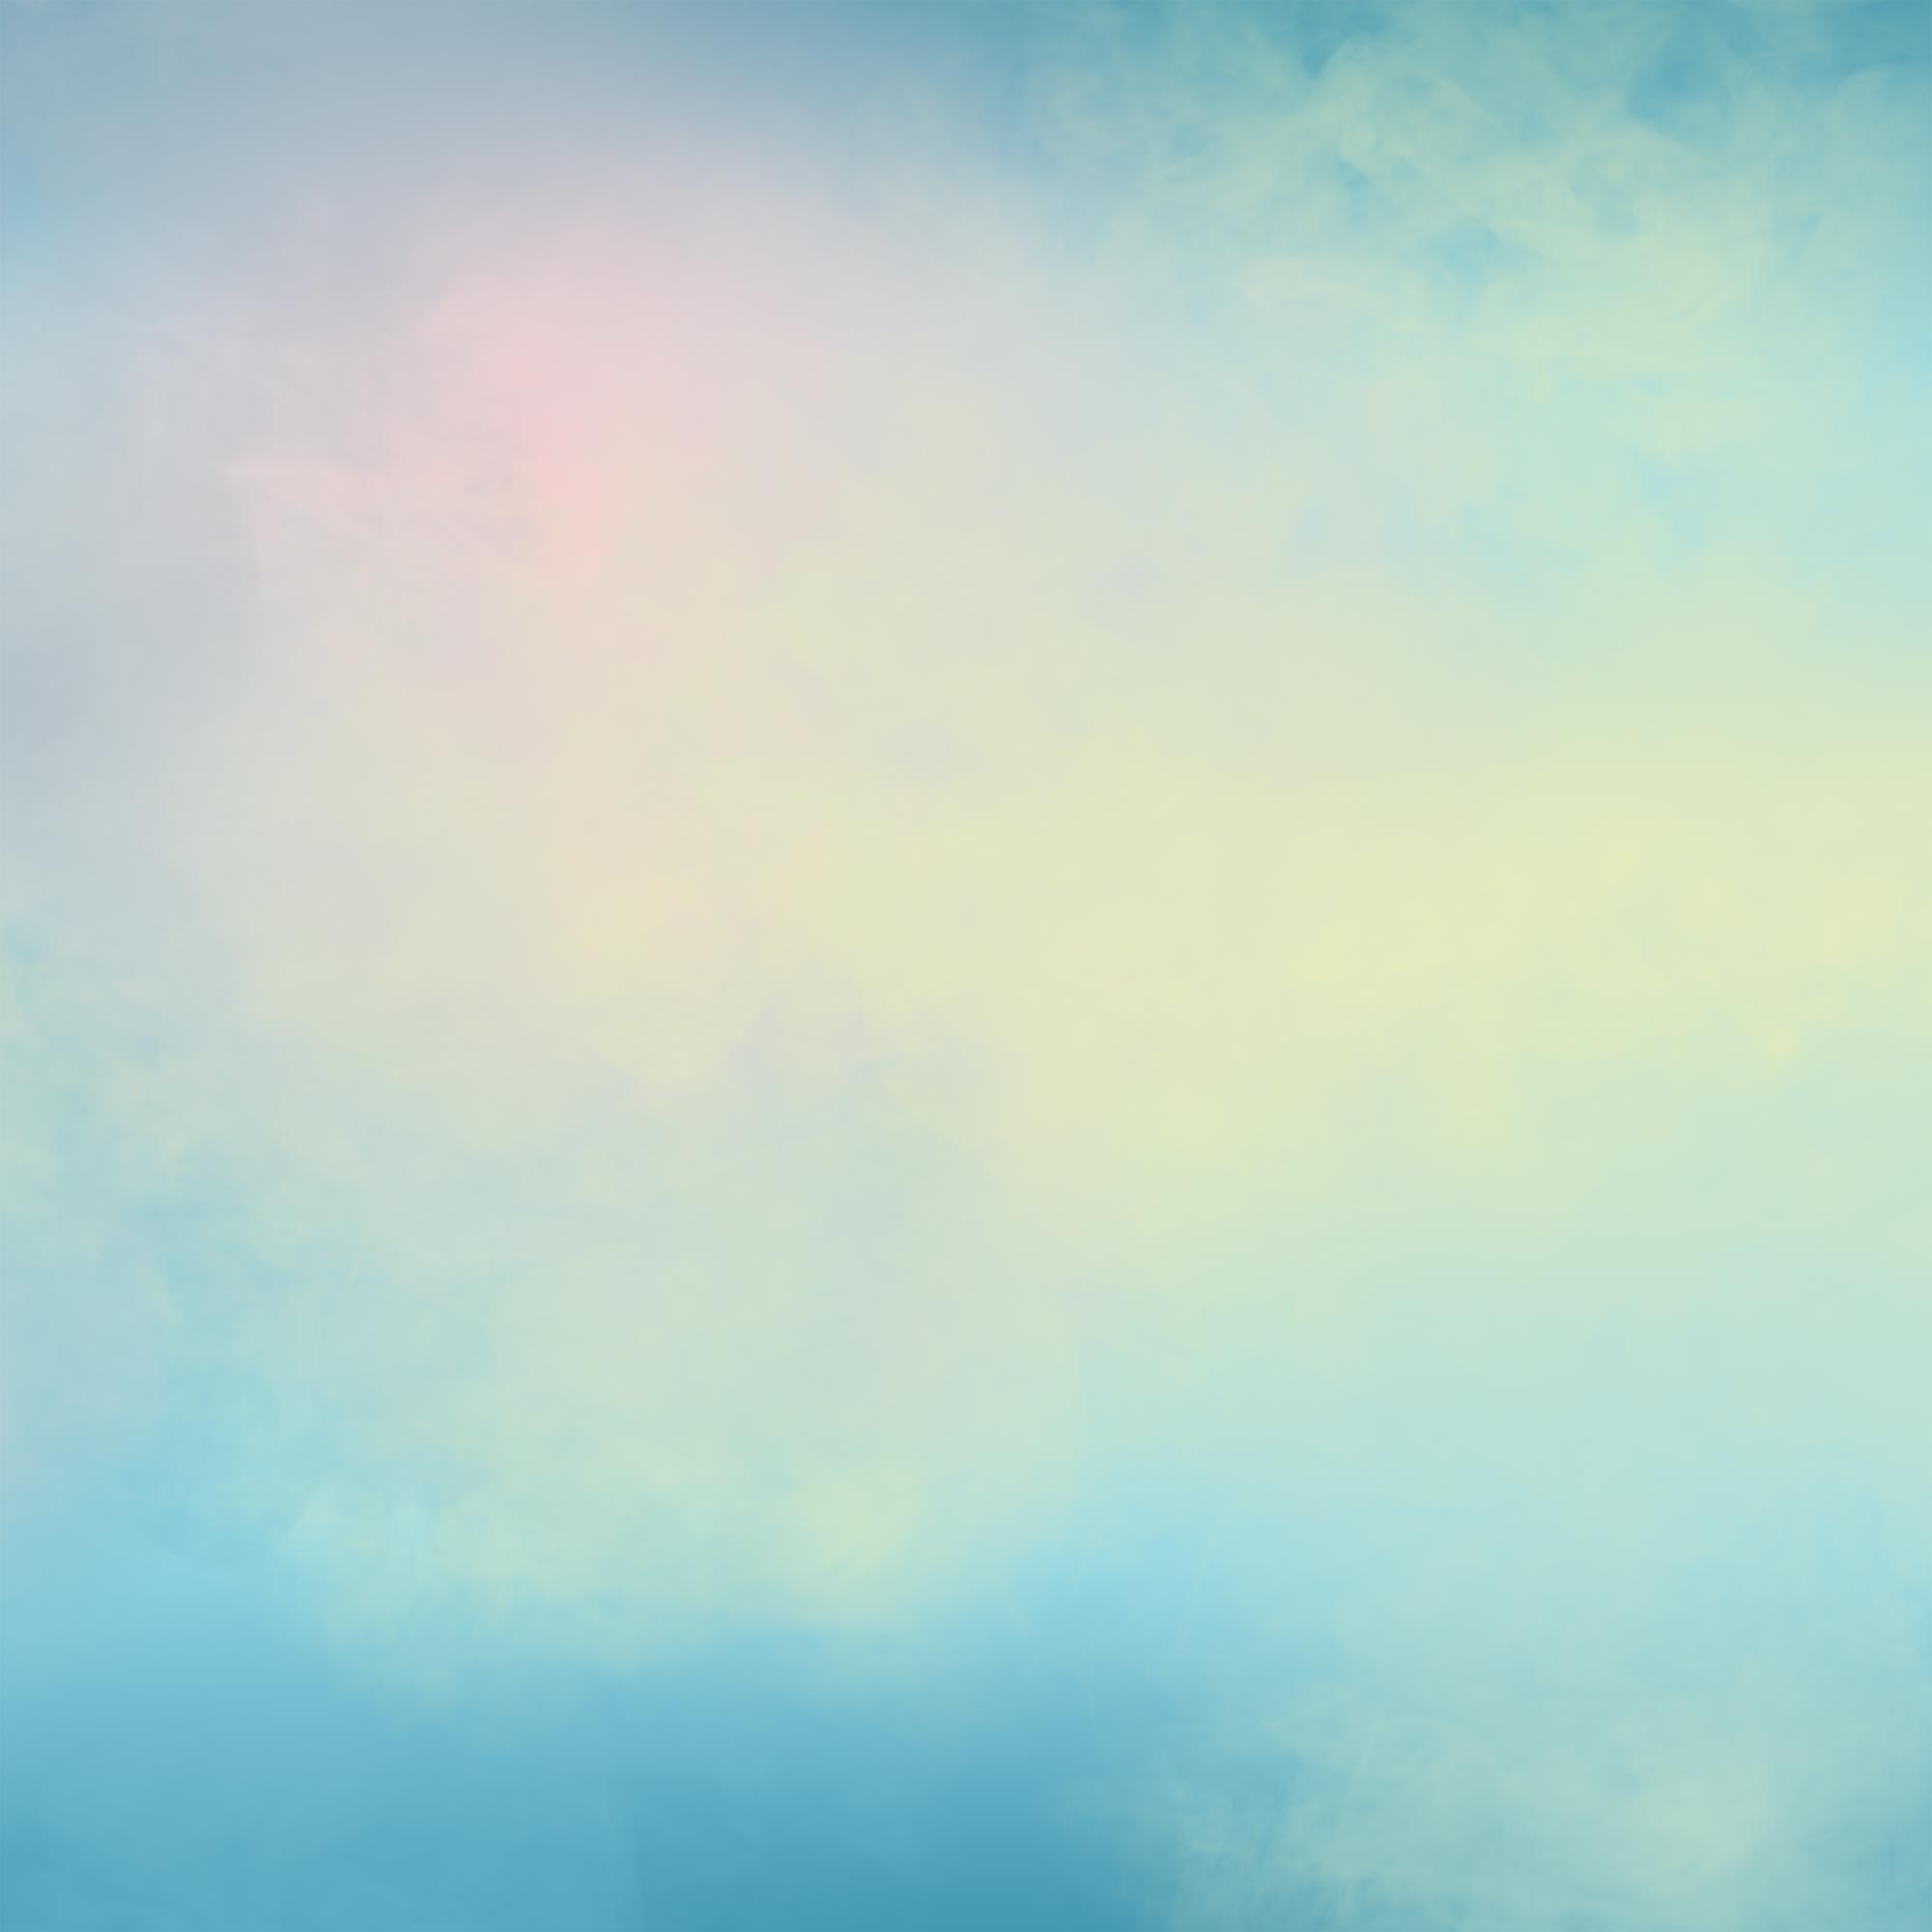  pink blue smoke brushes to meld the new pink area into the background